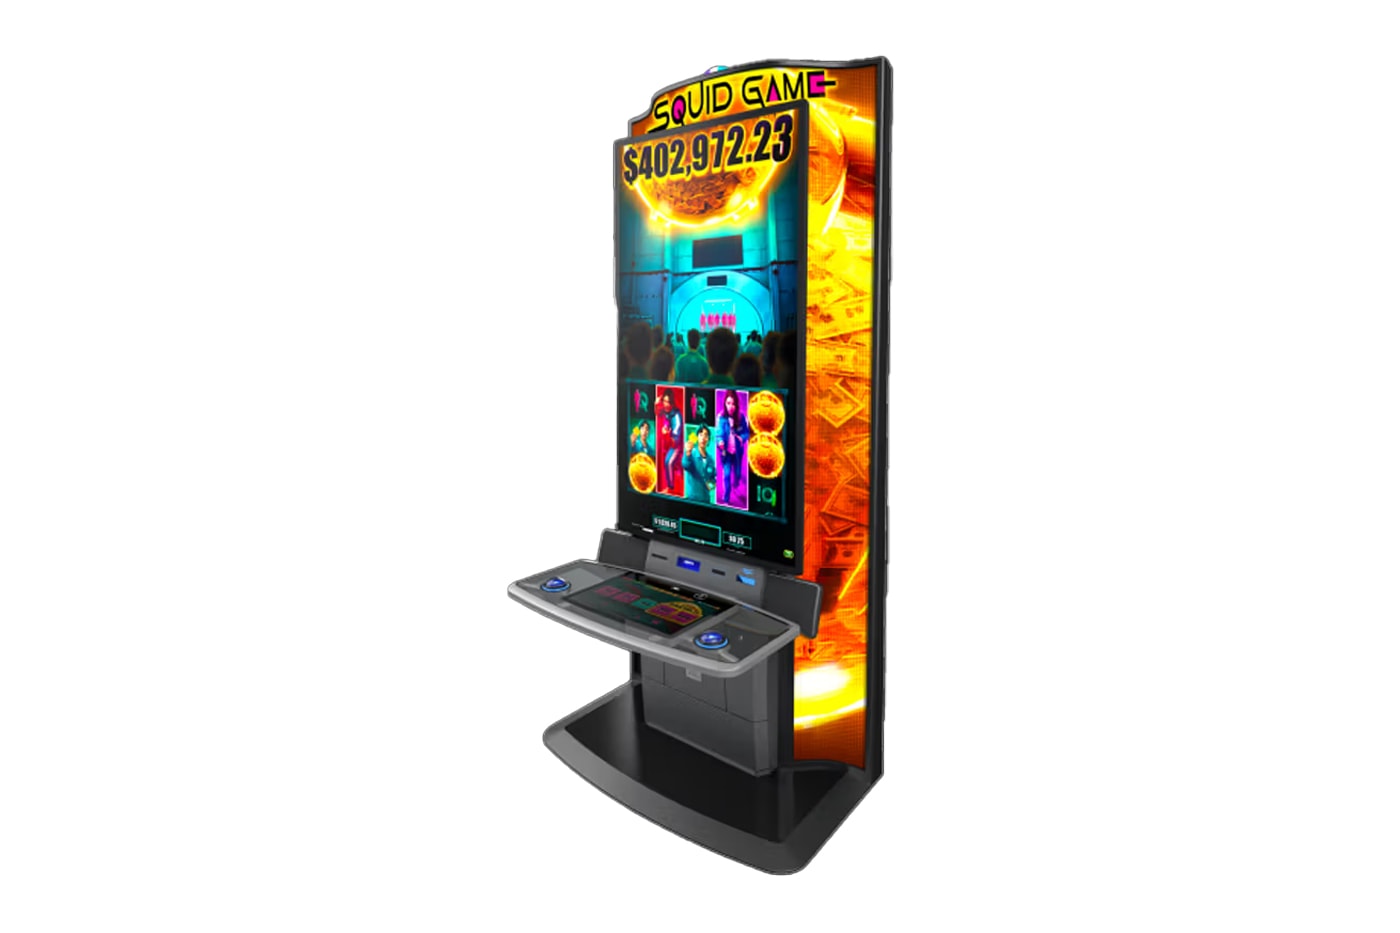 5 Awesome Arcade-Themed Online Slot Games